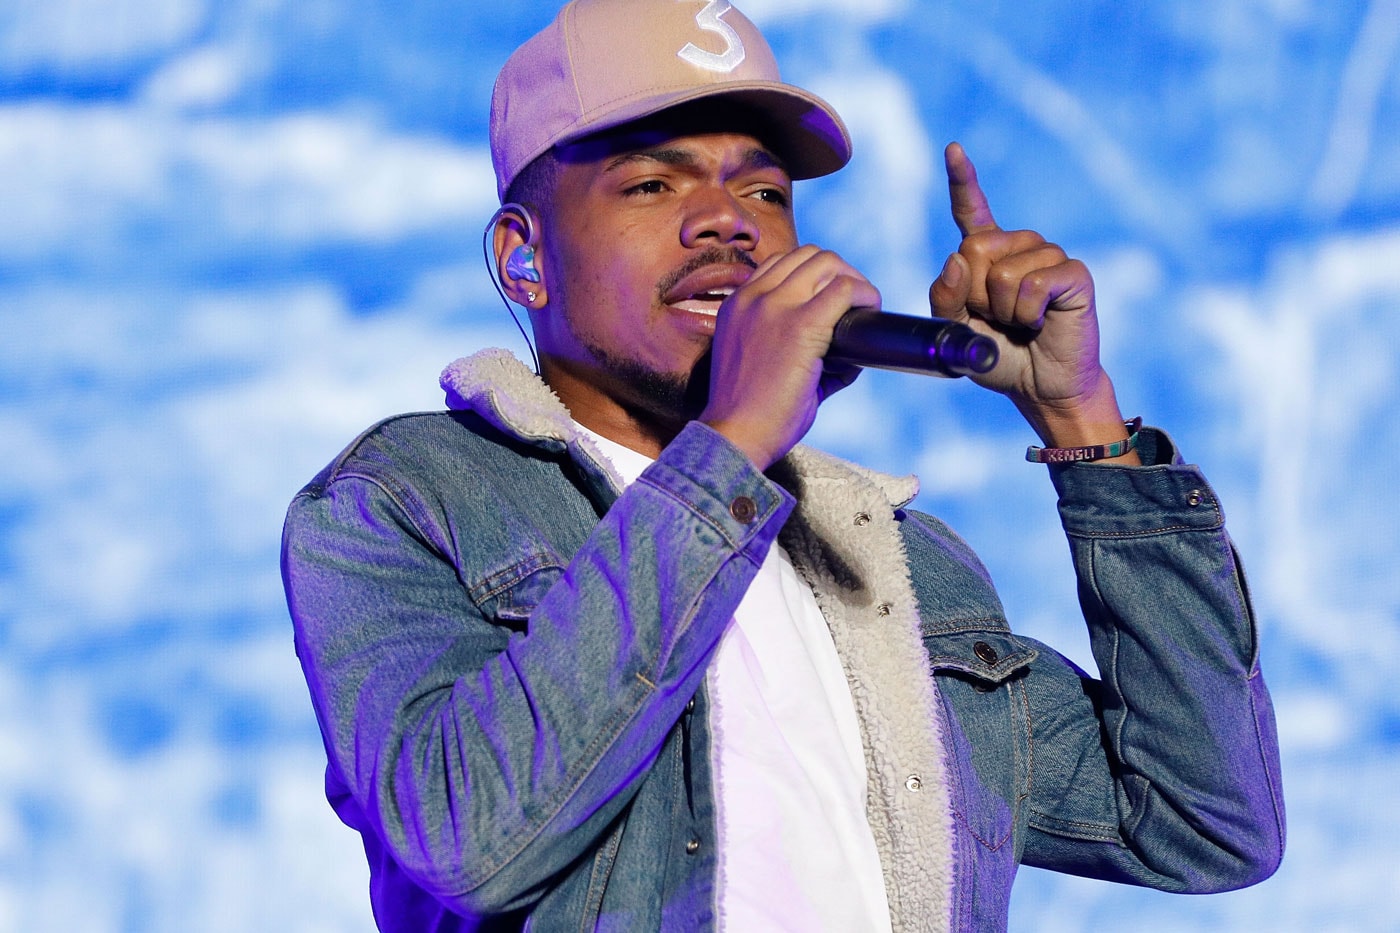 Chance the Rapper Independent Success Thoughts